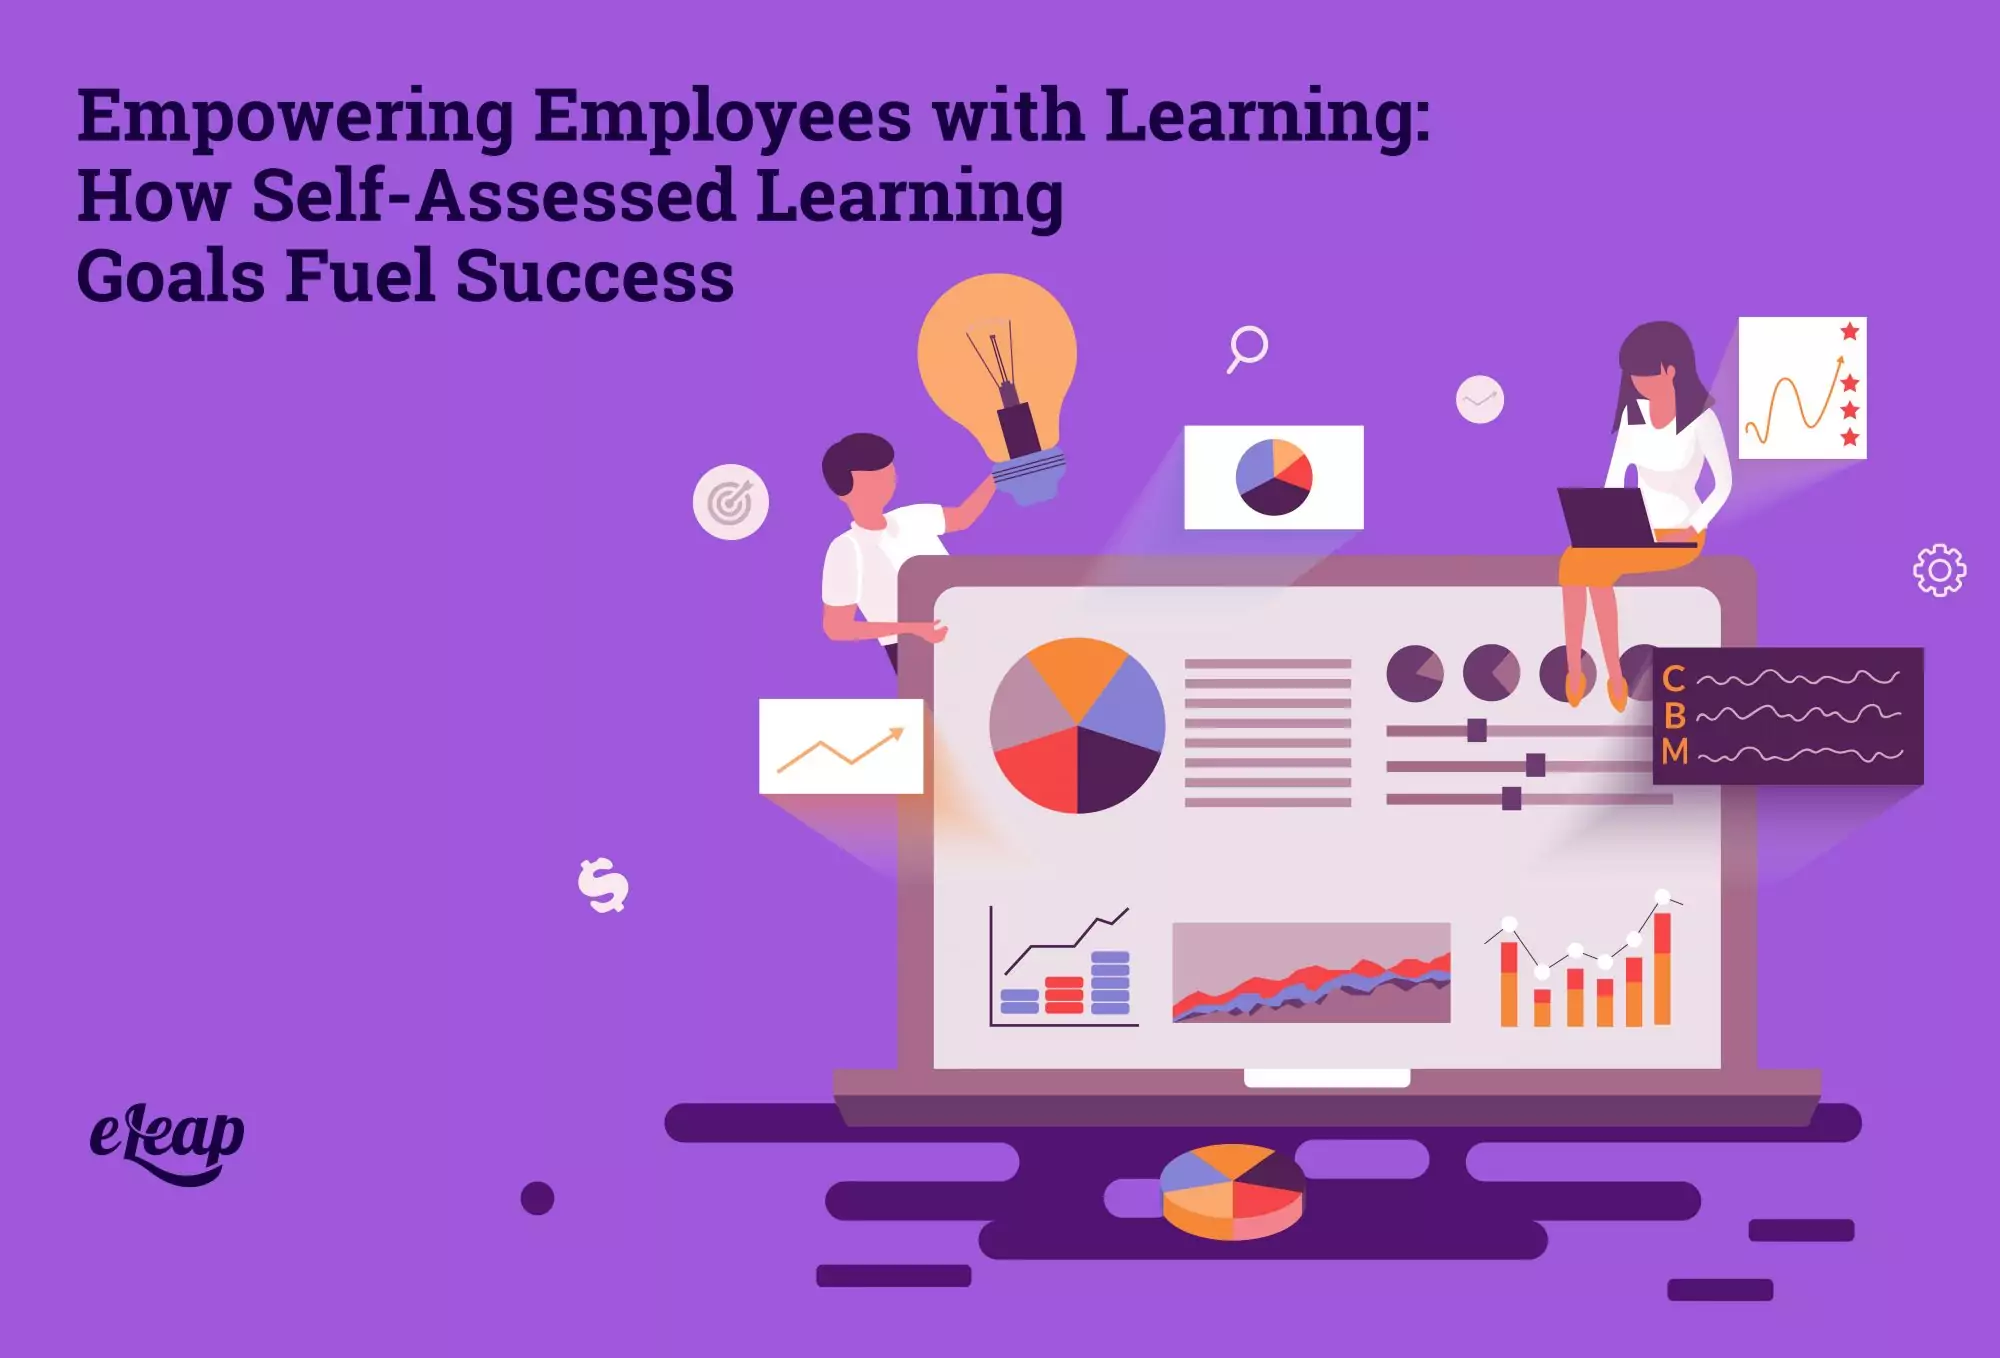 Empowering Employees with Learning: How Self-Assessed Learning Goals Fuel Success